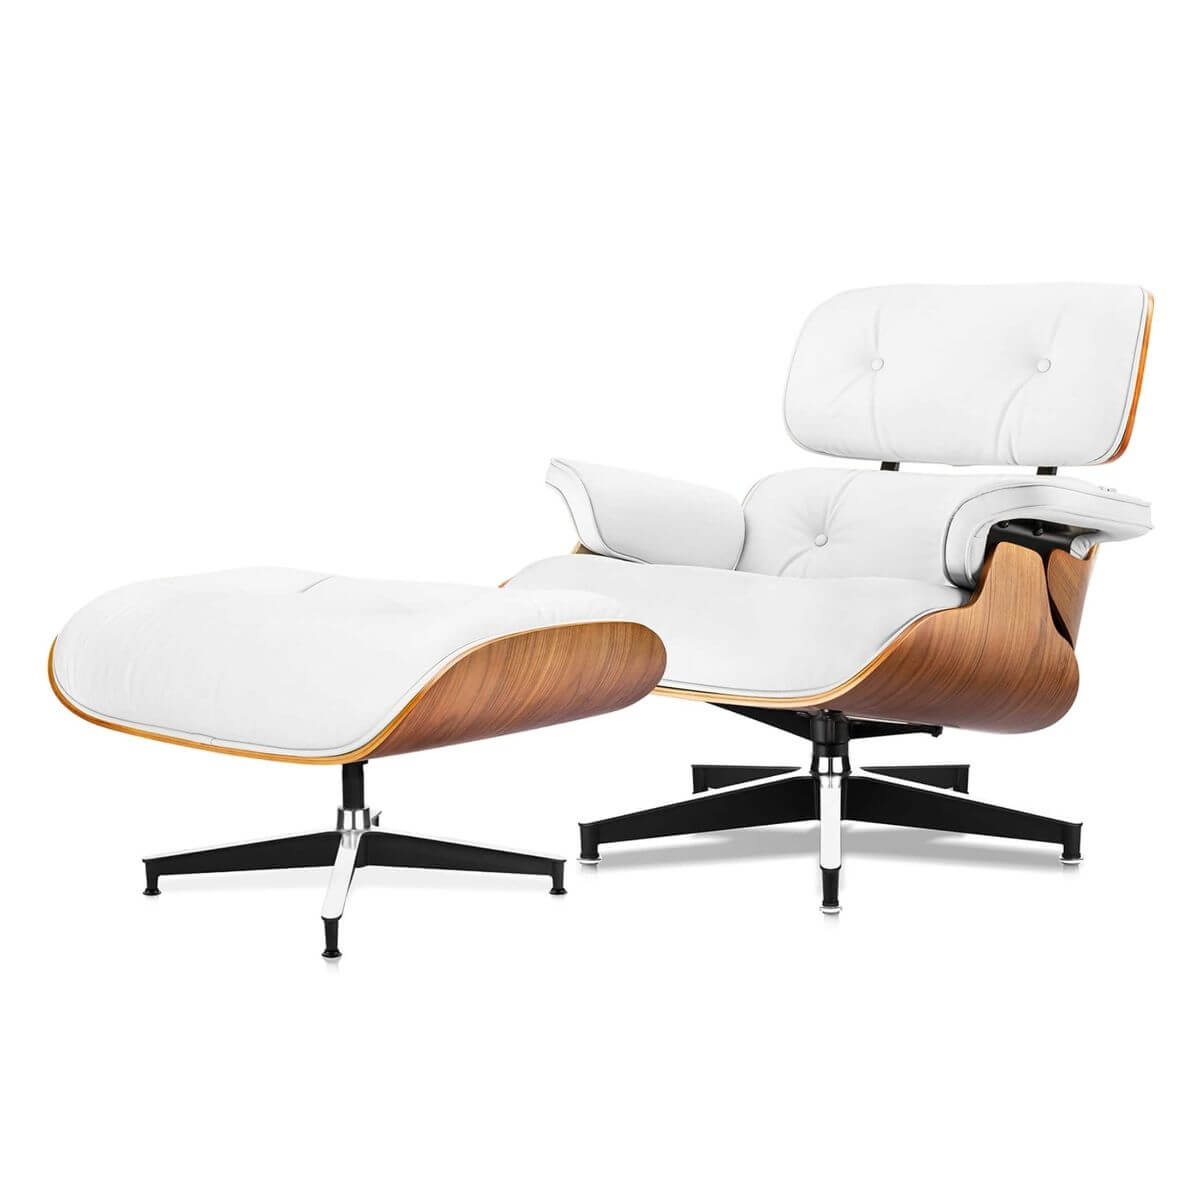 Luxuriance Designs - Eames Lounge Chair and Ottoman Replica (Premium Tall Version) - Walnut Pure White - Review